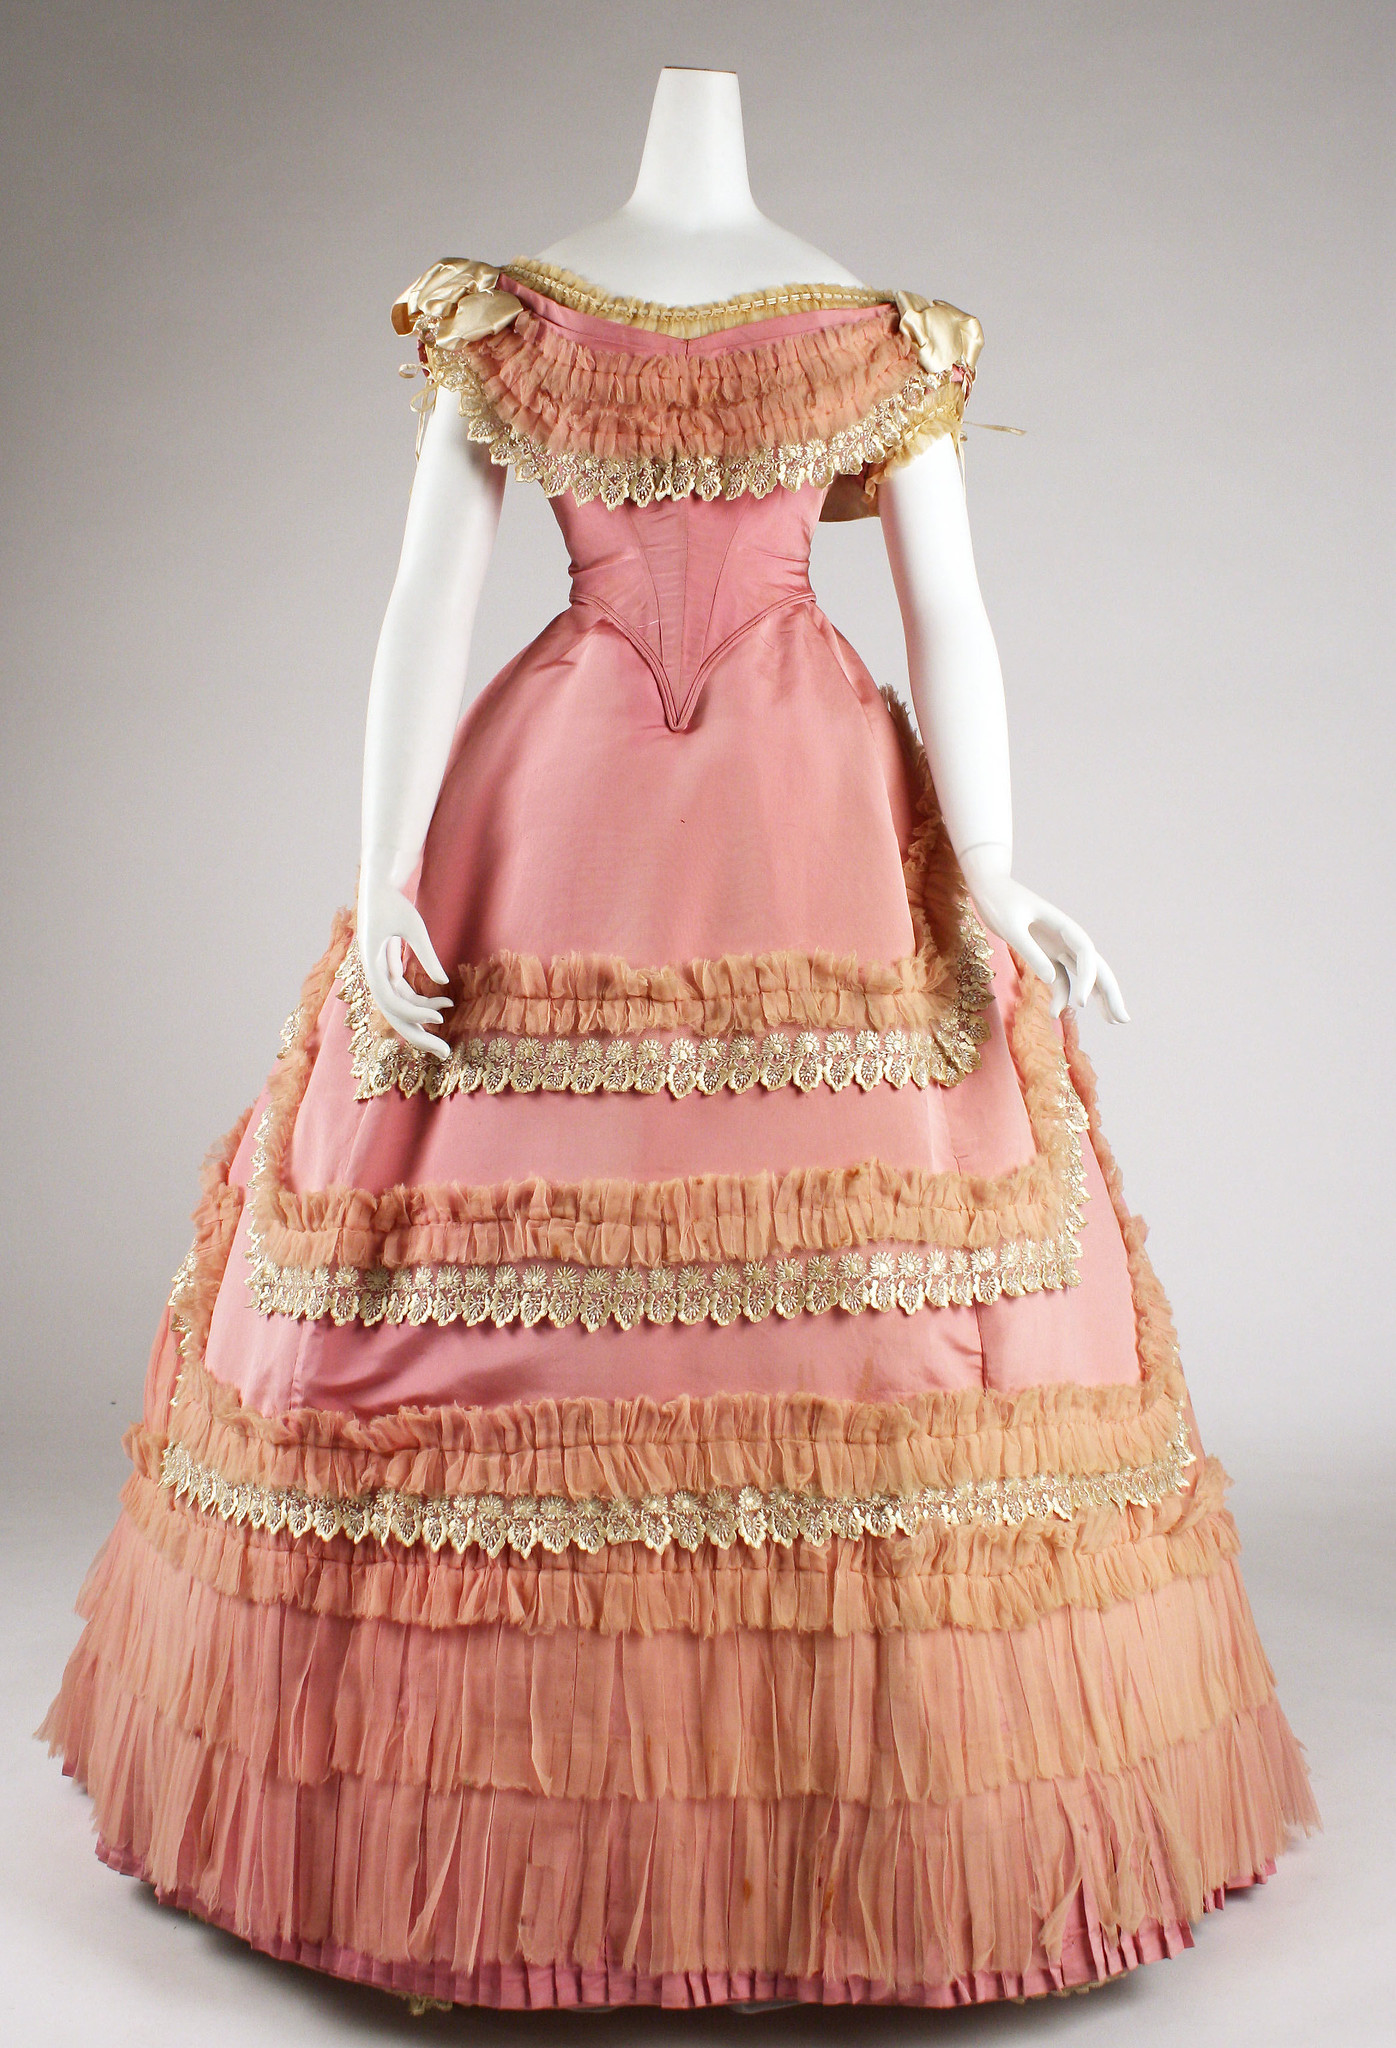 1868 Ball gown. French. Silk. metmuseum